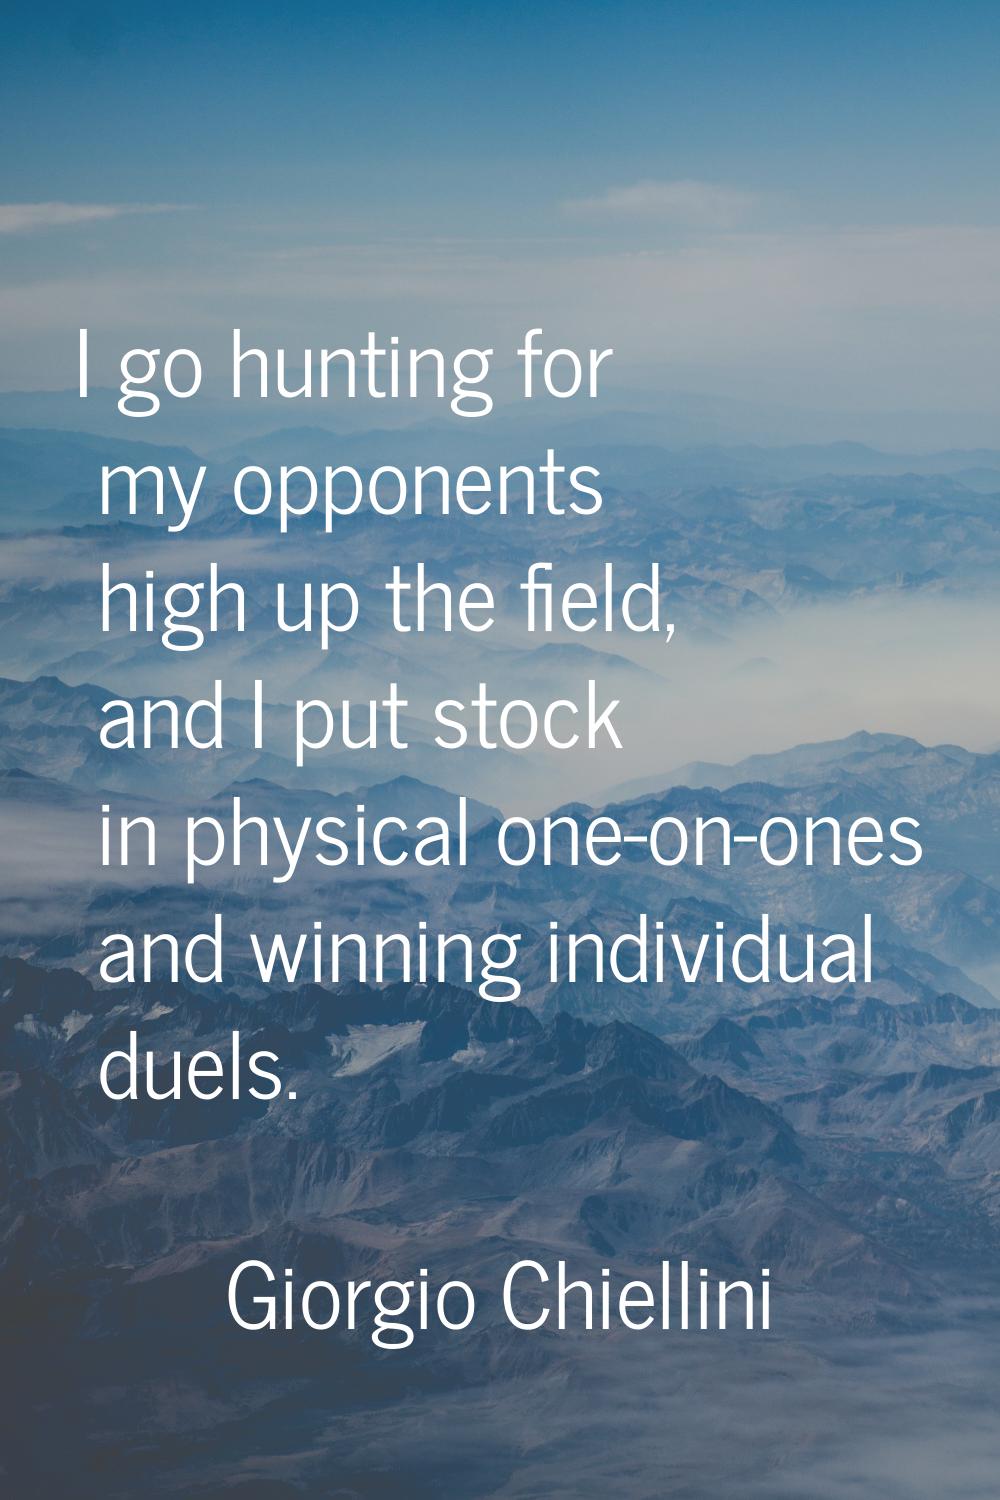 I go hunting for my opponents high up the field, and I put stock in physical one-on-ones and winnin